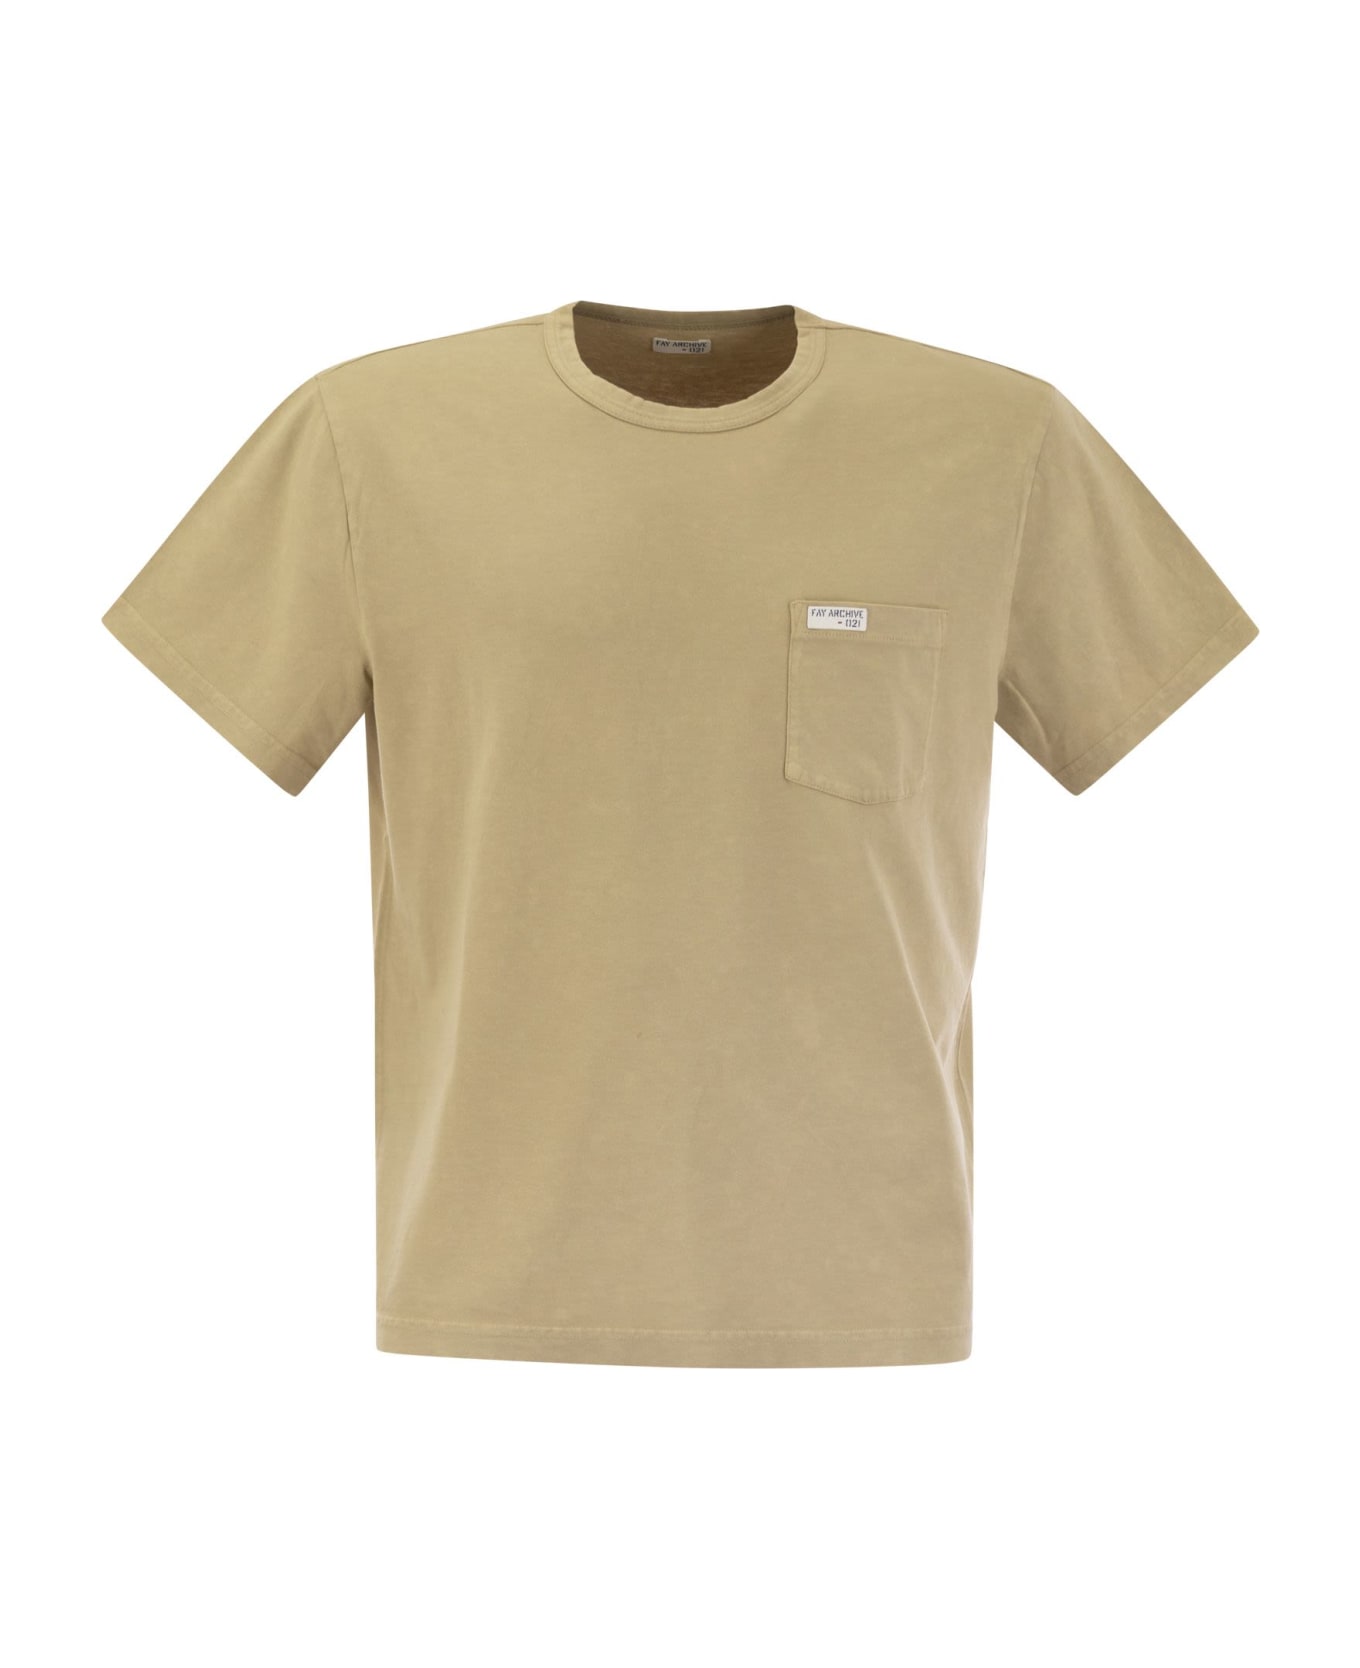 Fay T-shirt Fay Archive - Beige シャツ